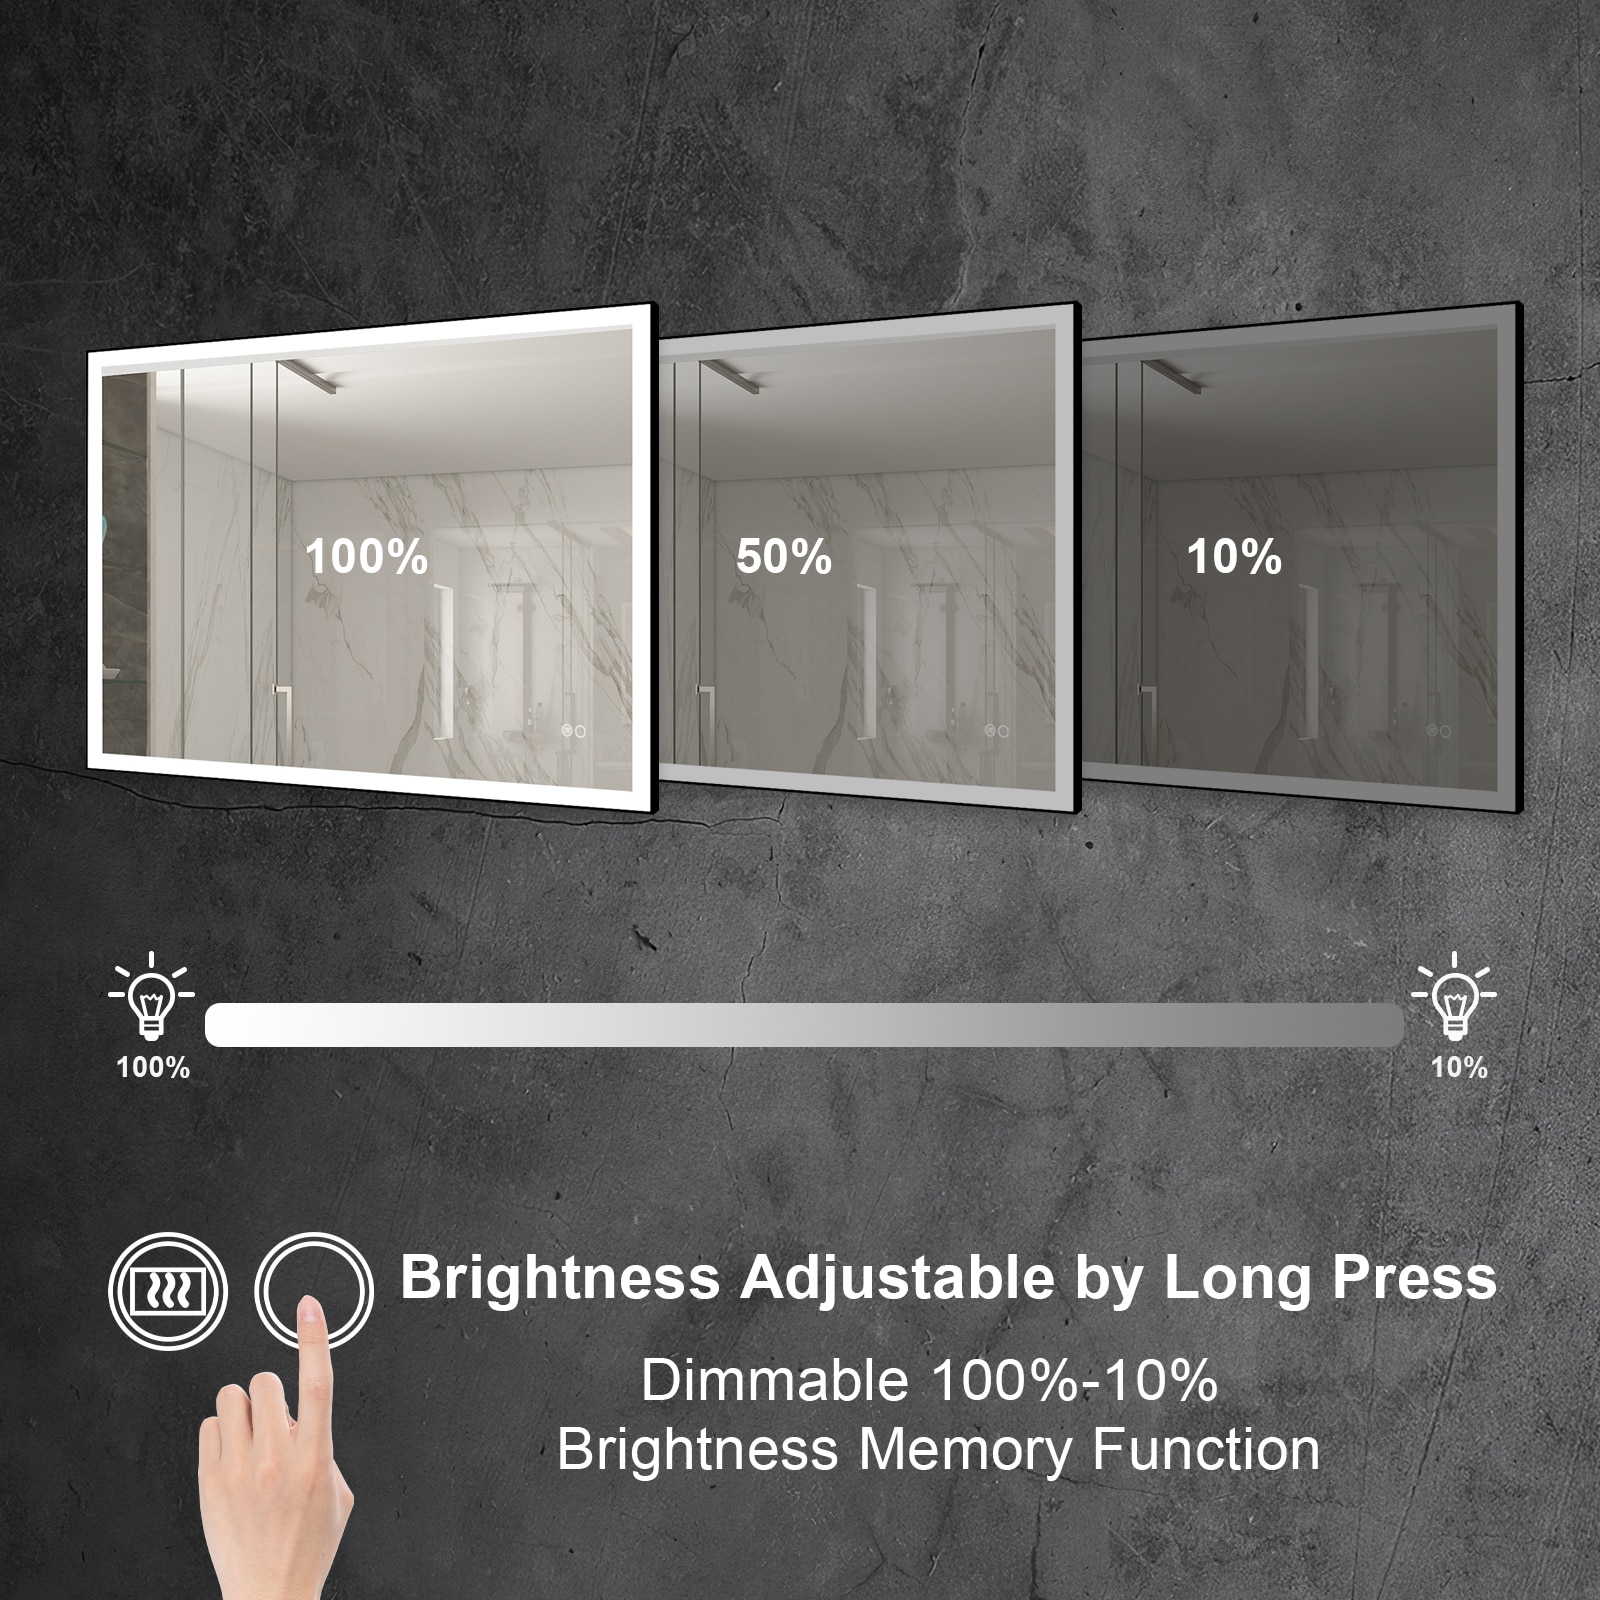 WELLFOR W5 Bathroom Mirrors 48-in x 36-in Framed Dimmable Lighted Fog ...